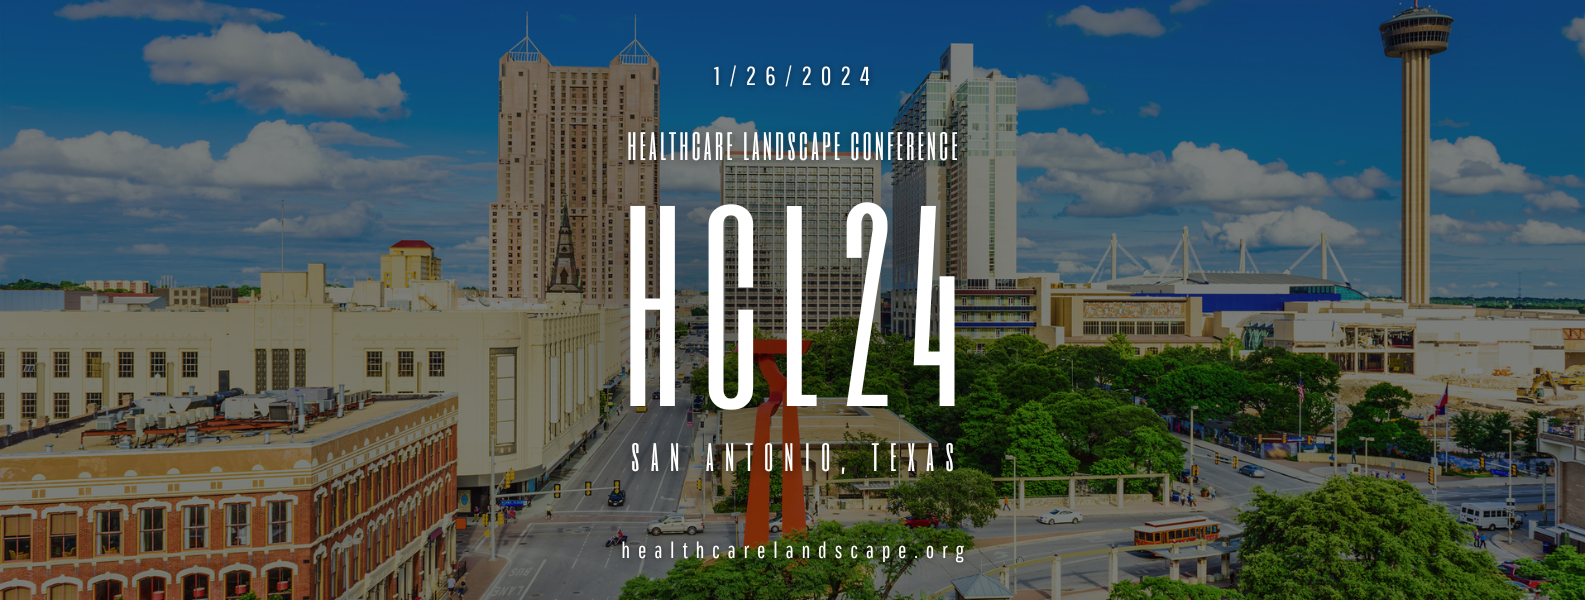 Healthcare Lanscape Conference 2024